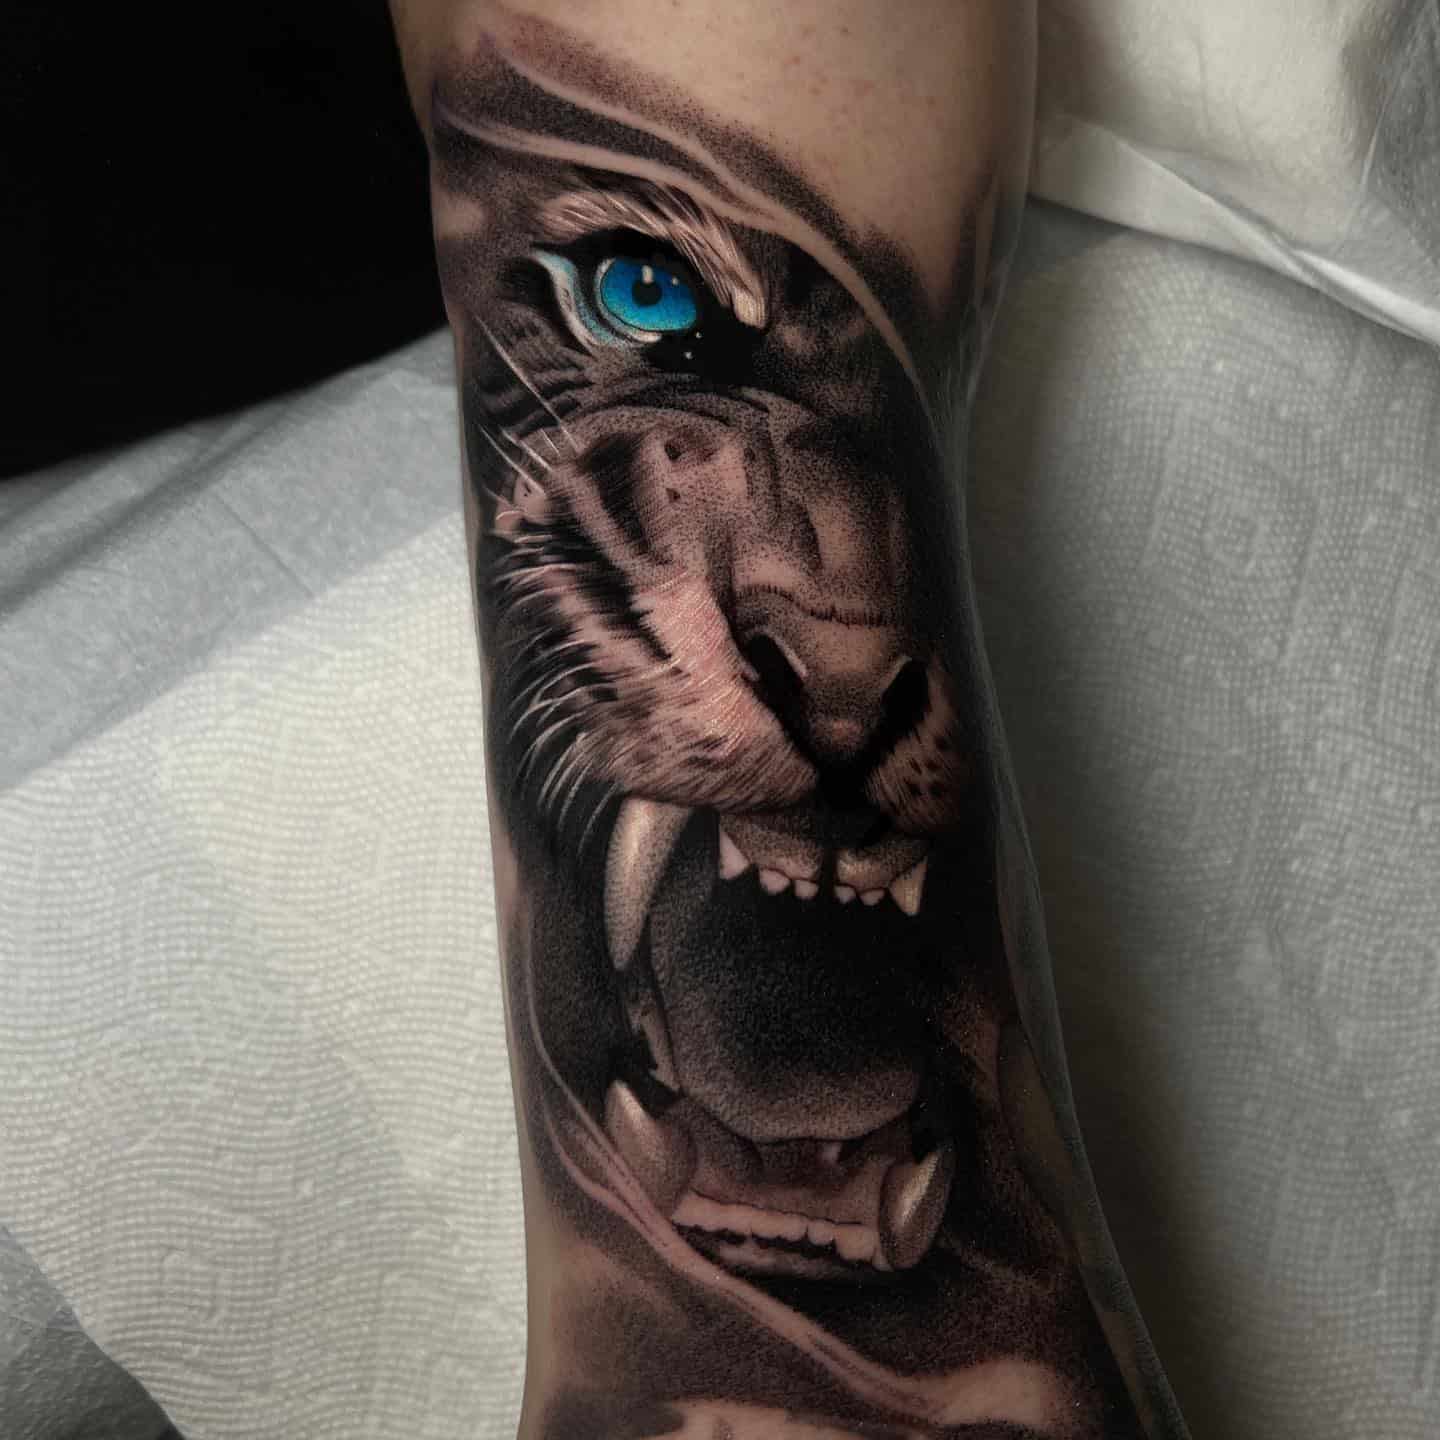 Amazing Tiger Tattoo Ideas For Men And Women